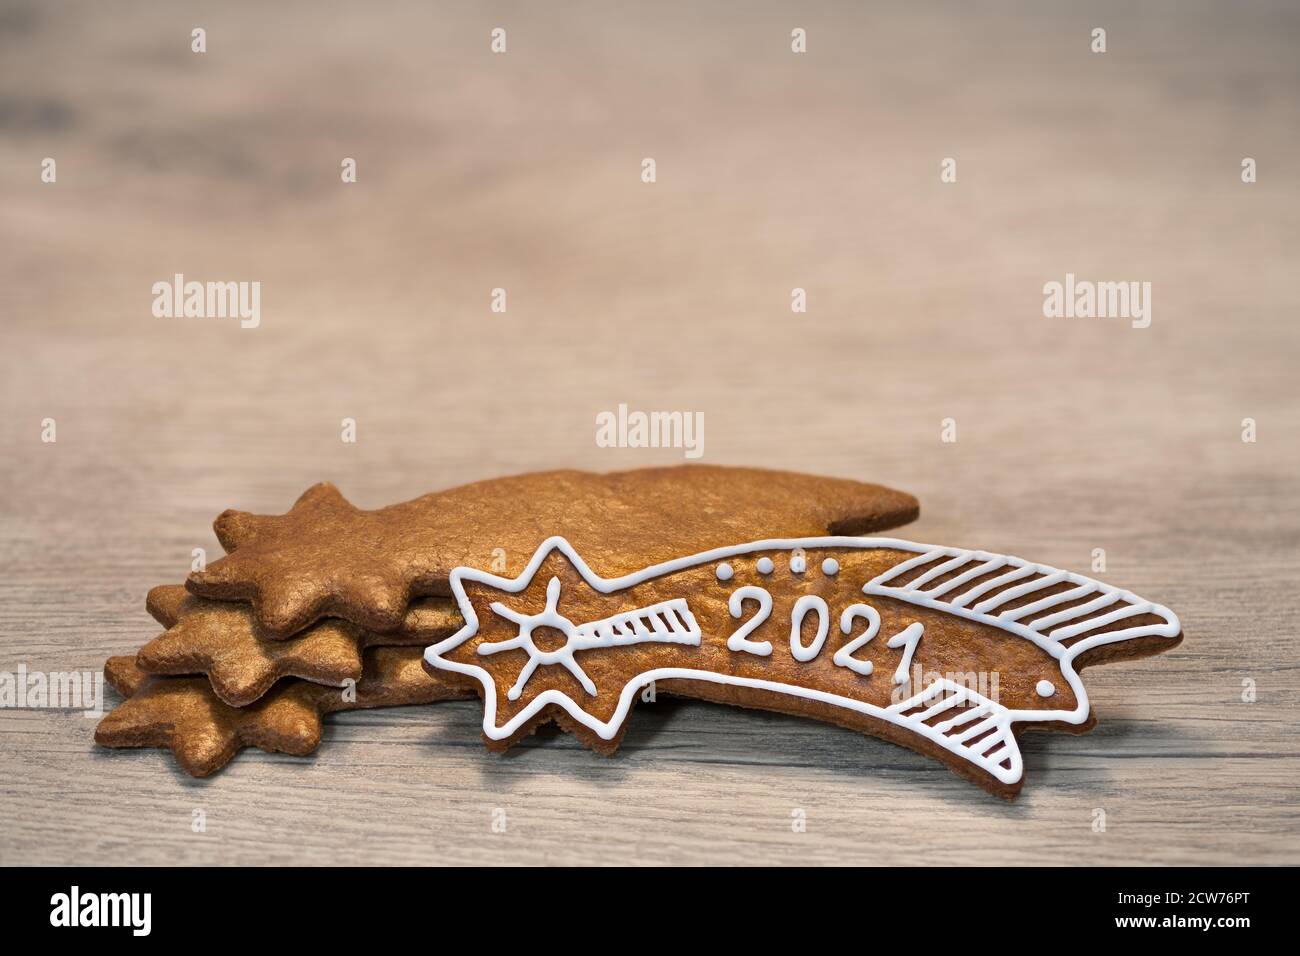 New Year 2021 on ornate gingerbread Bethlehem star for good luck laid on wood background. Gold baked sweet Christmas cookie decorated with white icing. Stock Photo